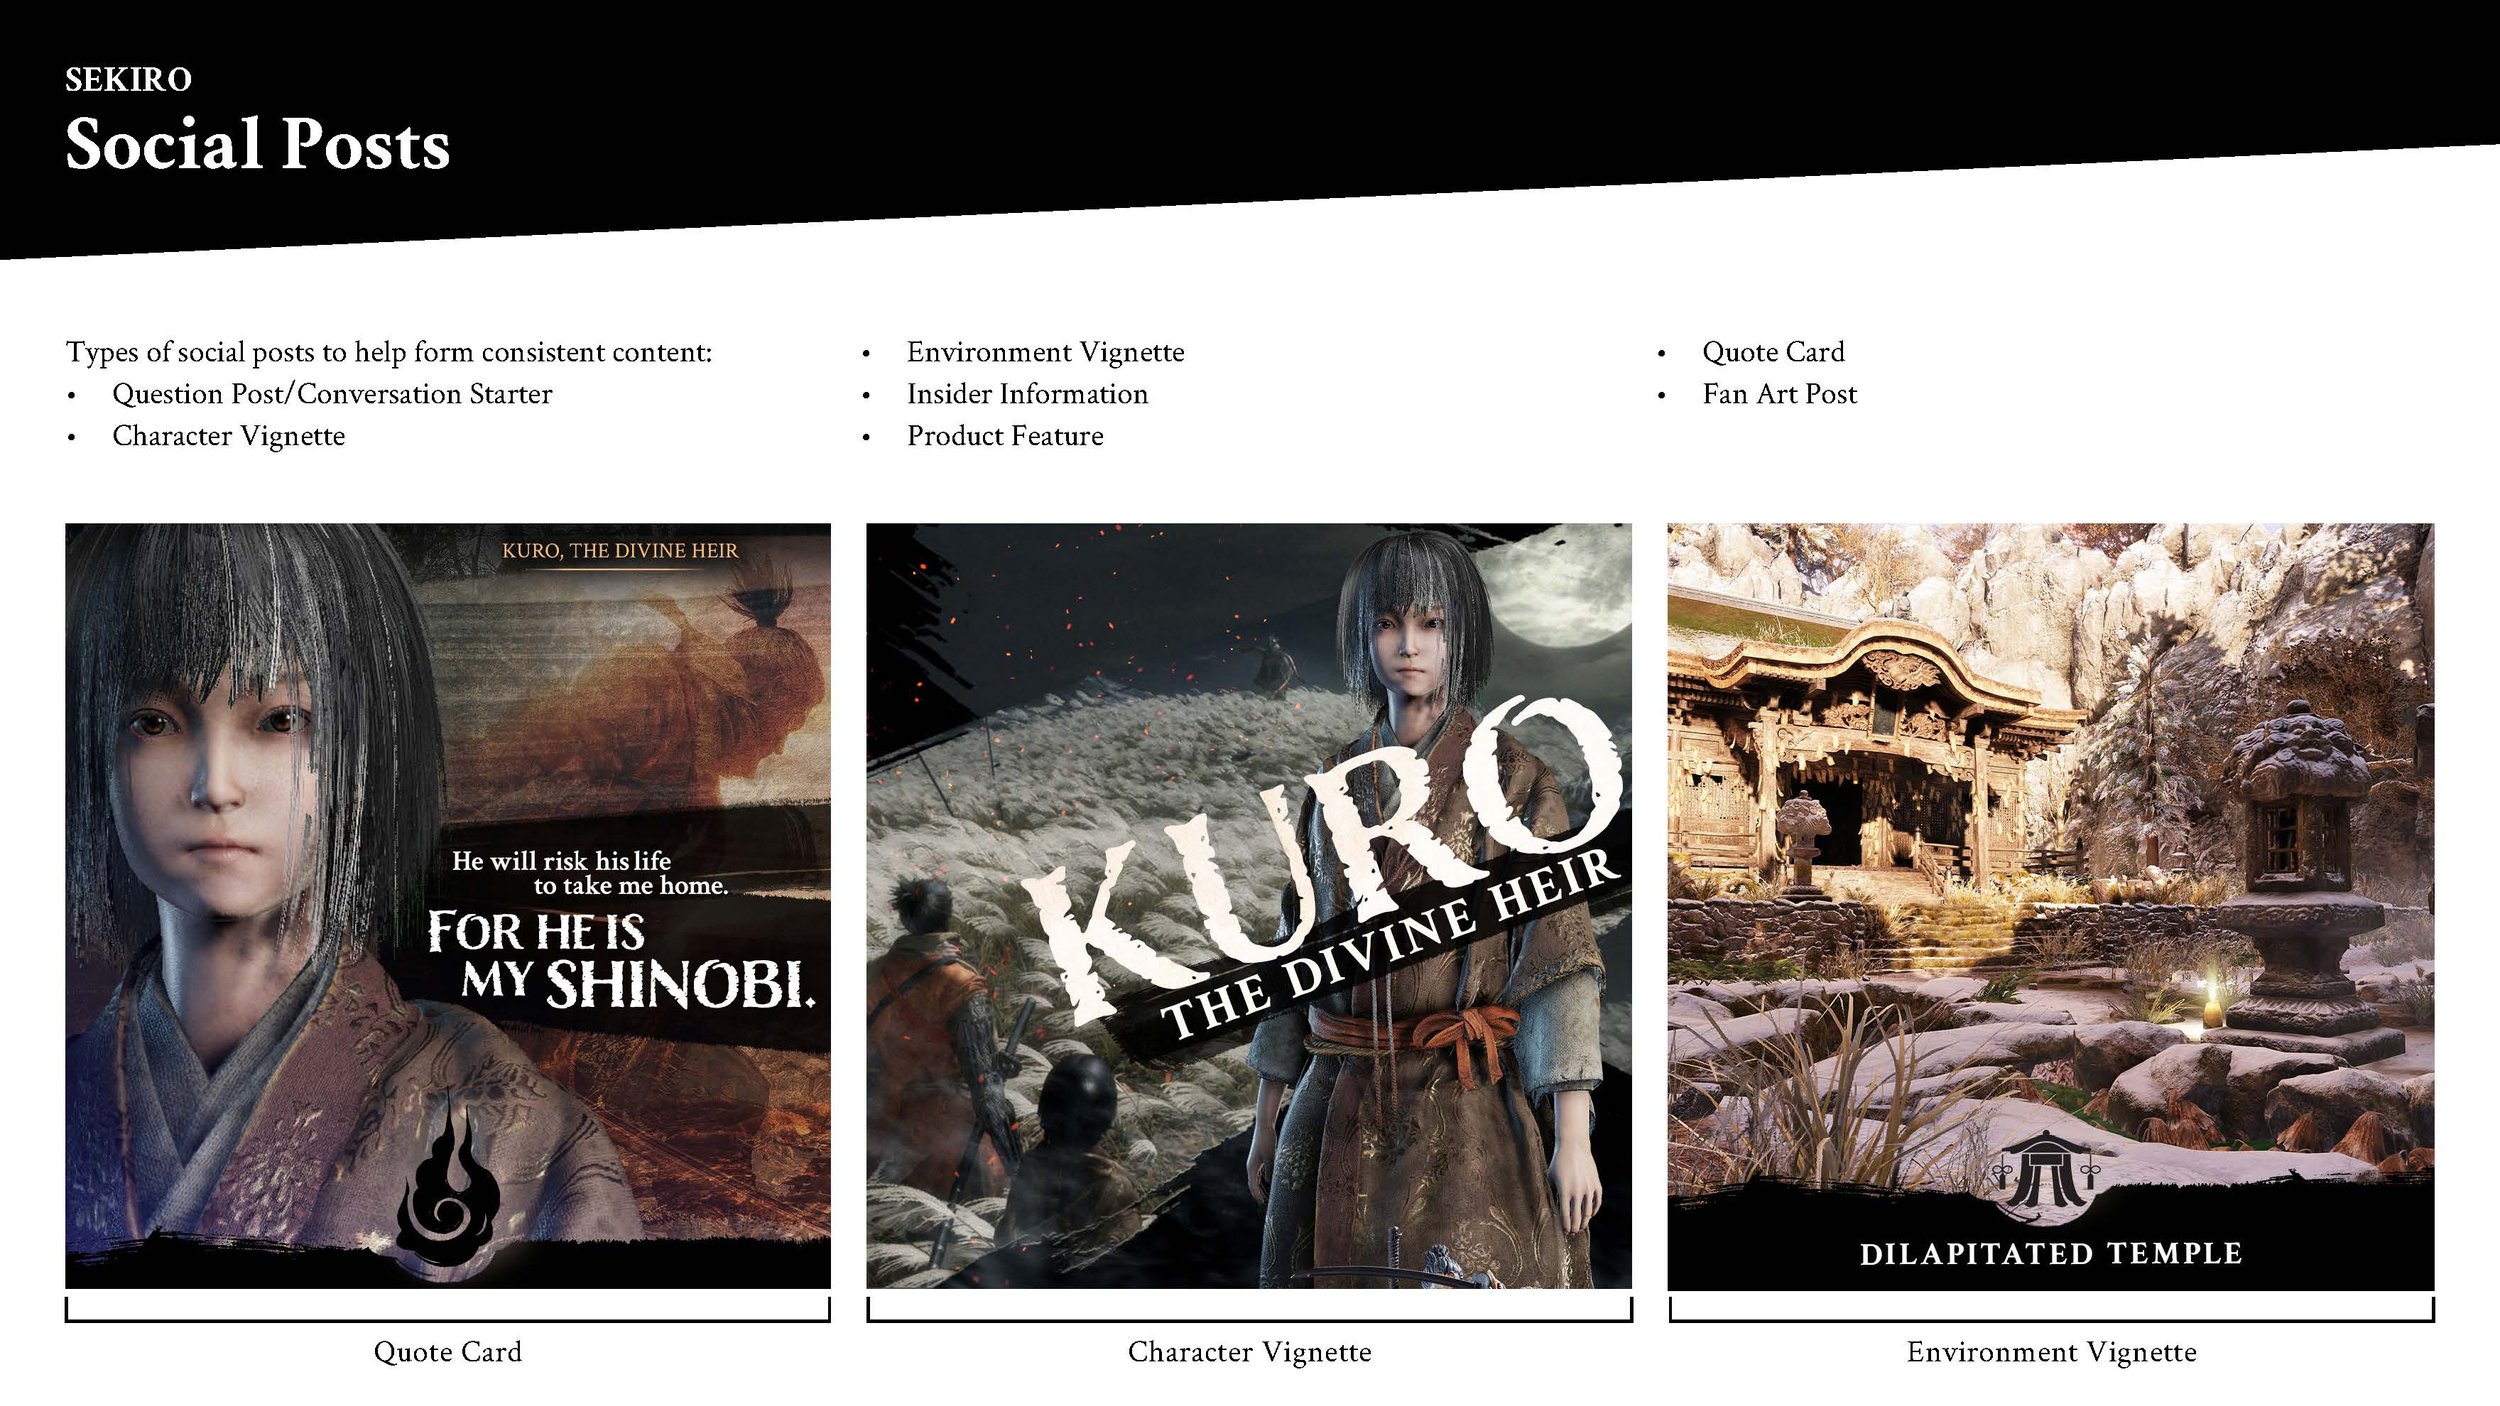 d20190926-007_Social_Explorations_PITCH_02b (Only Sekiro)_Page_1.jpg